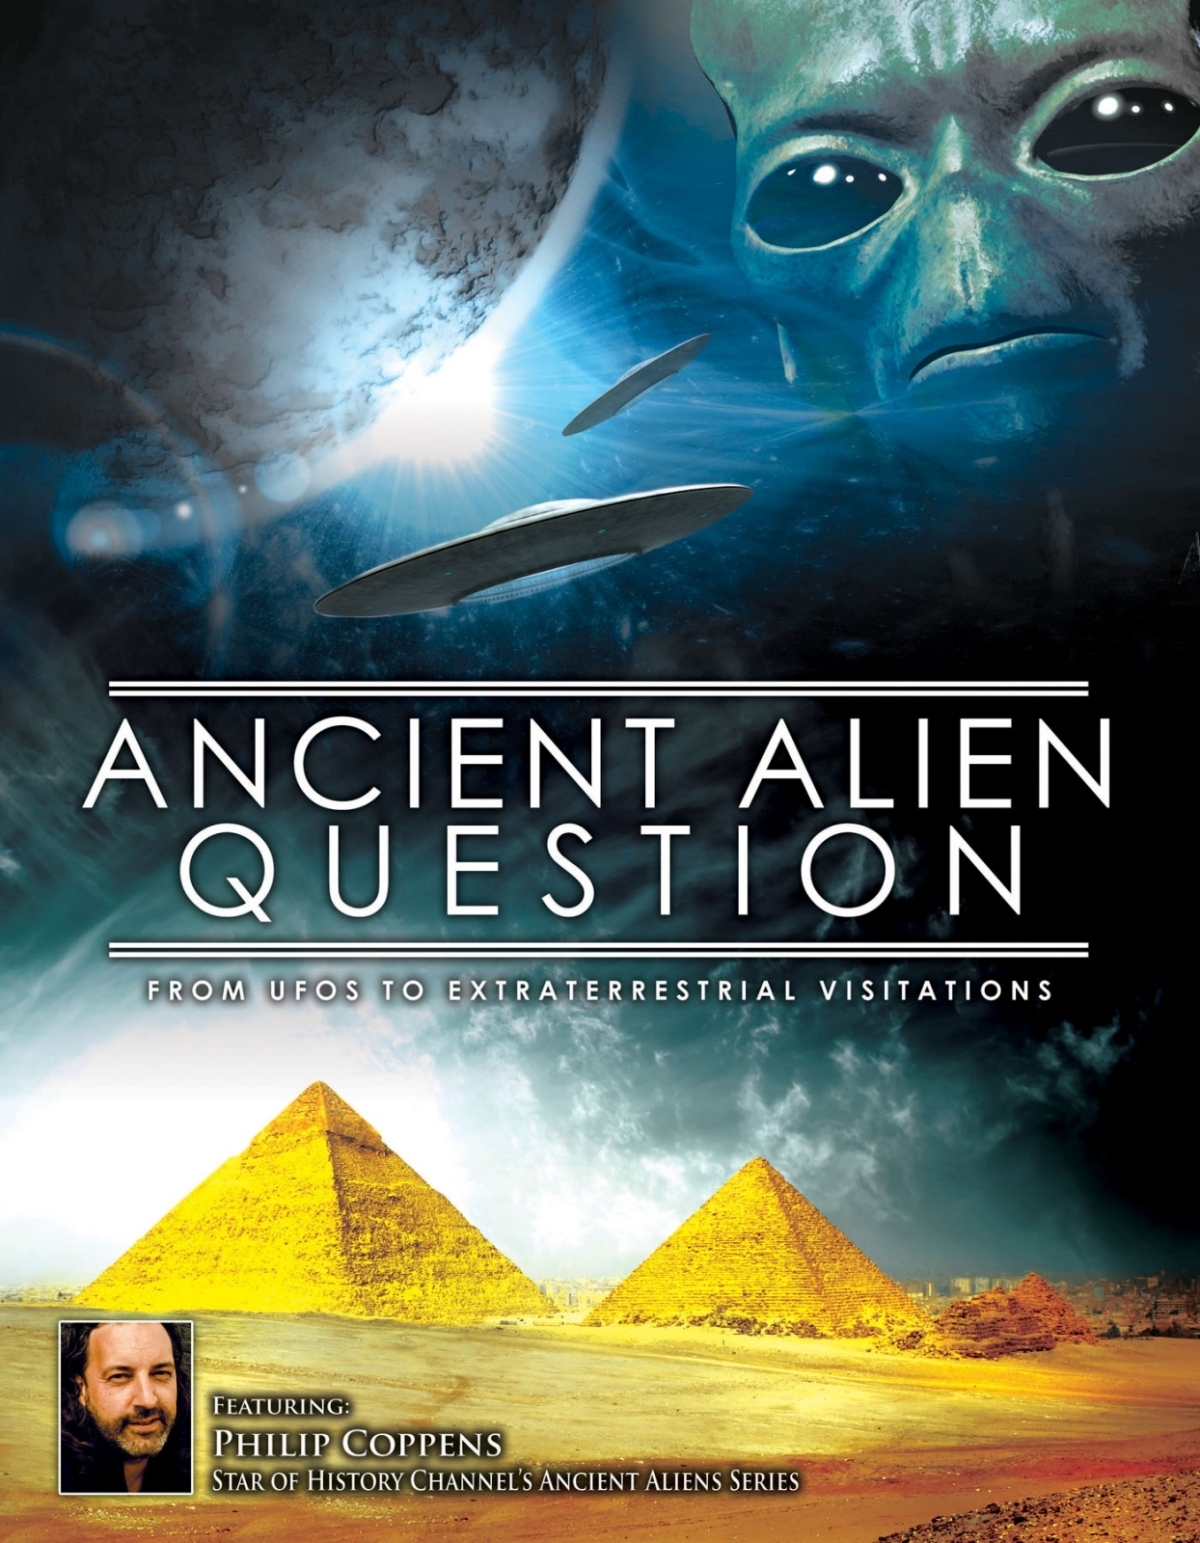 Ancient Alien Question: From UFOs to Extraterrestrial Visitations (2012) Screenshot 1 